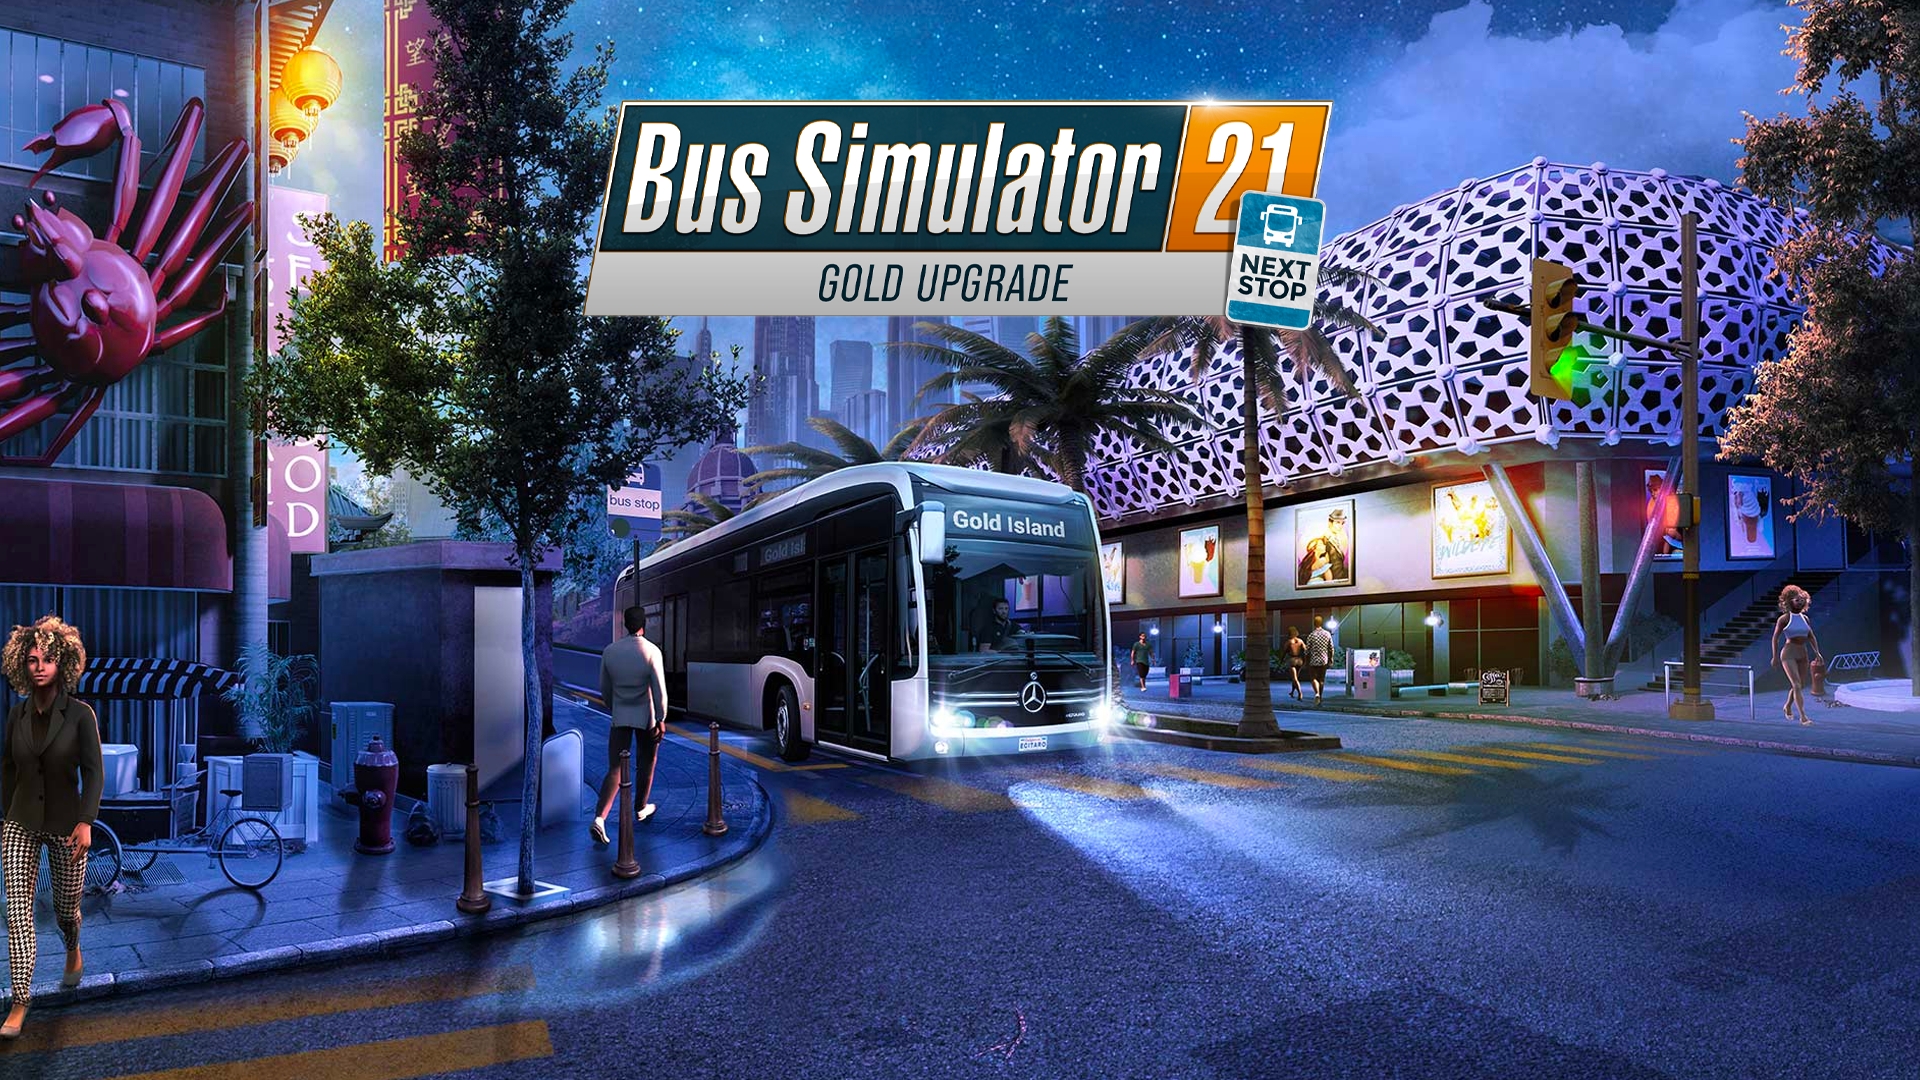 Bus Simulator 21 Next Stop - Gold Upgrade Steam Key for PC - Buy now